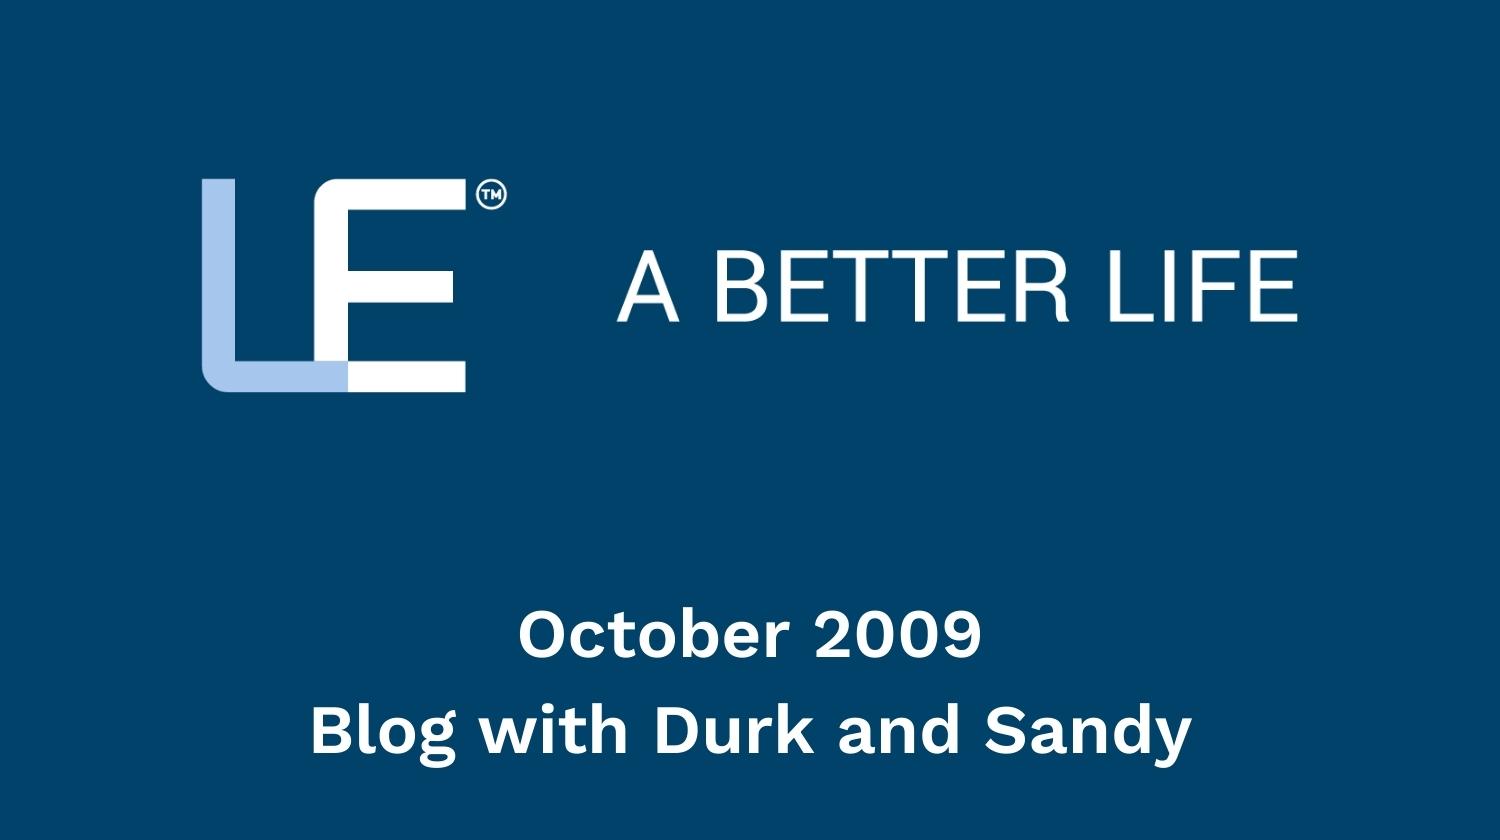 October 2009 Blog with Durk and Sandy